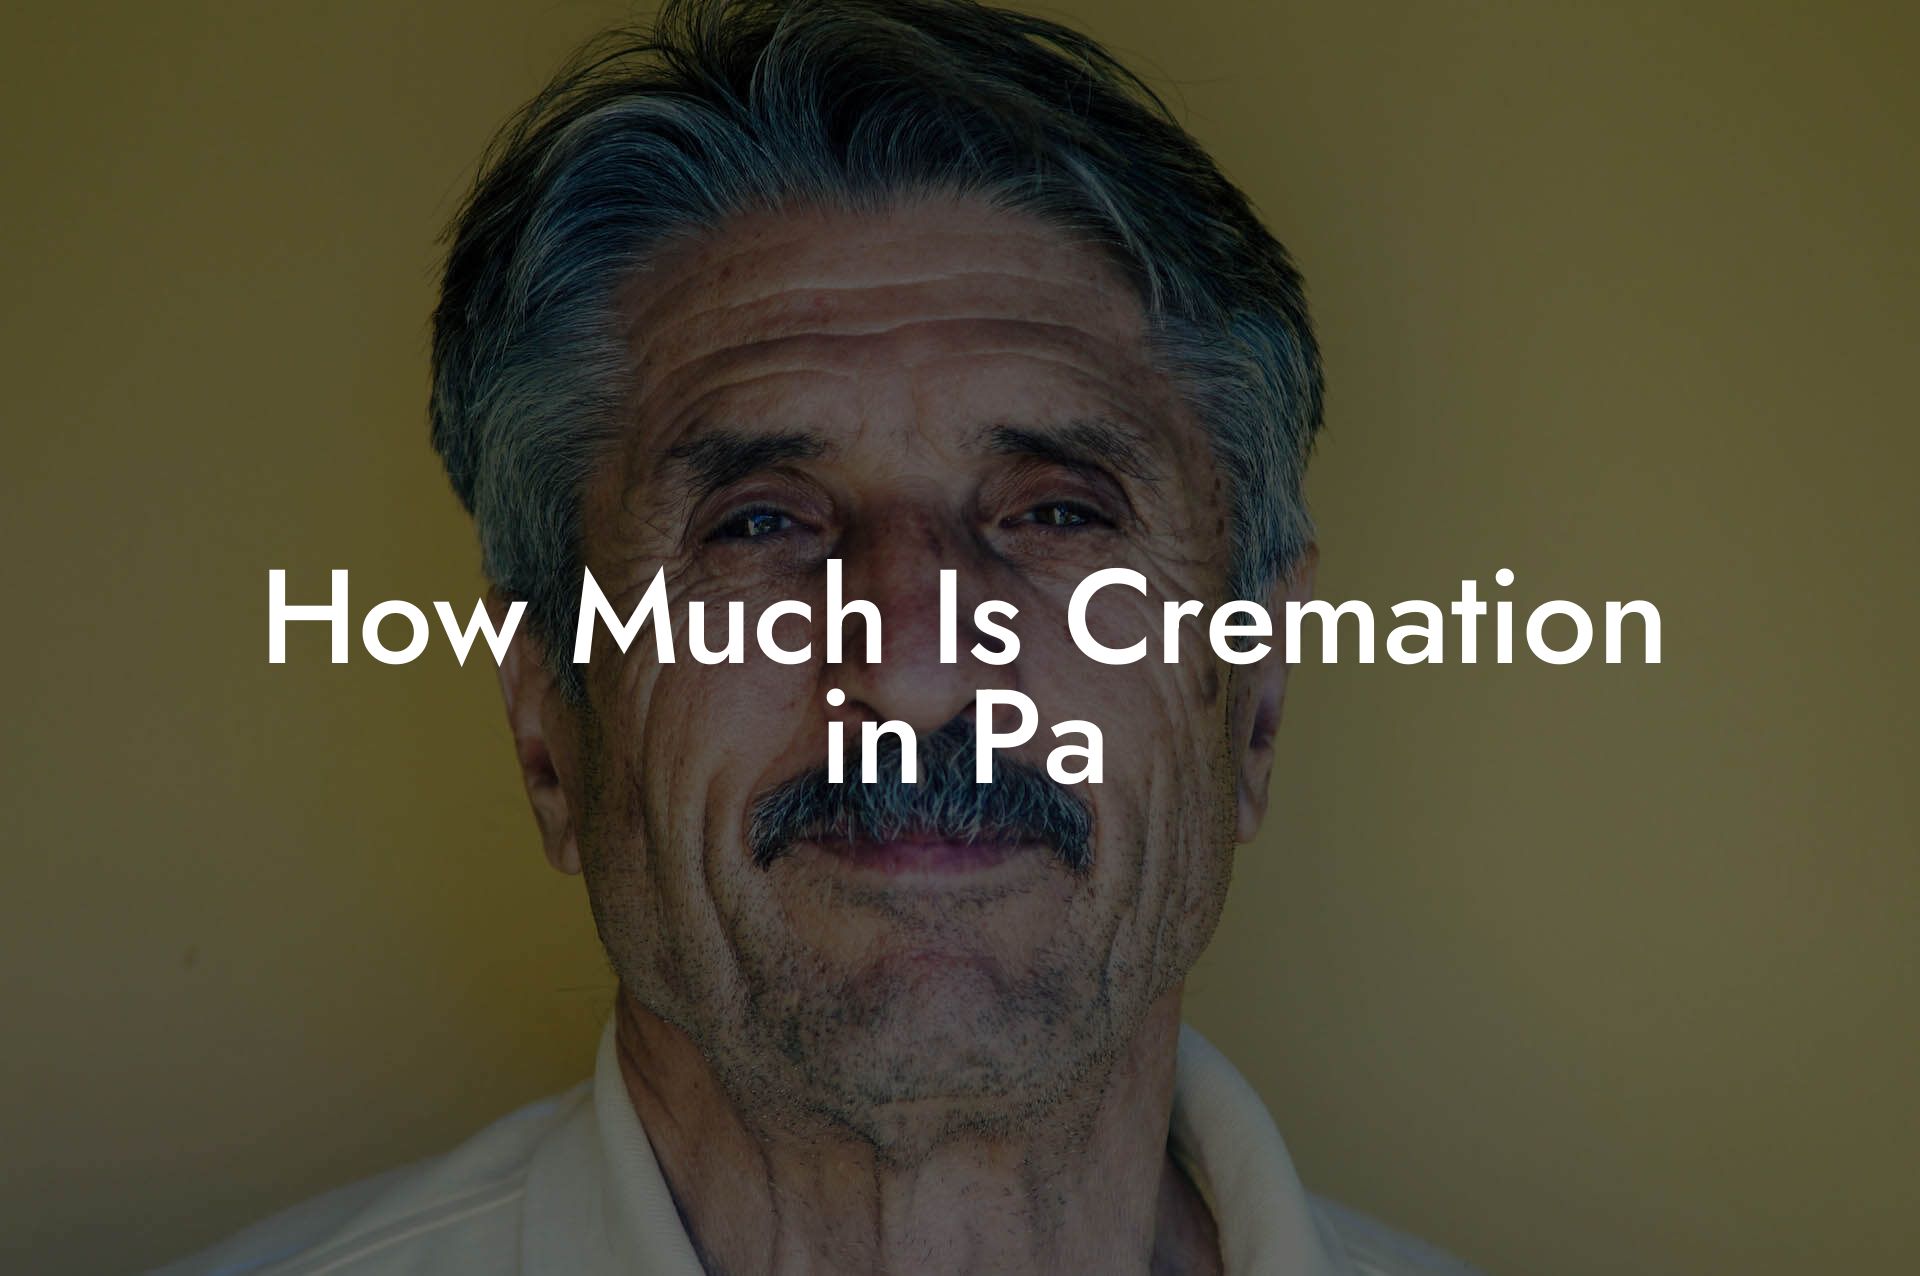 How Much Is Cremation in Pa